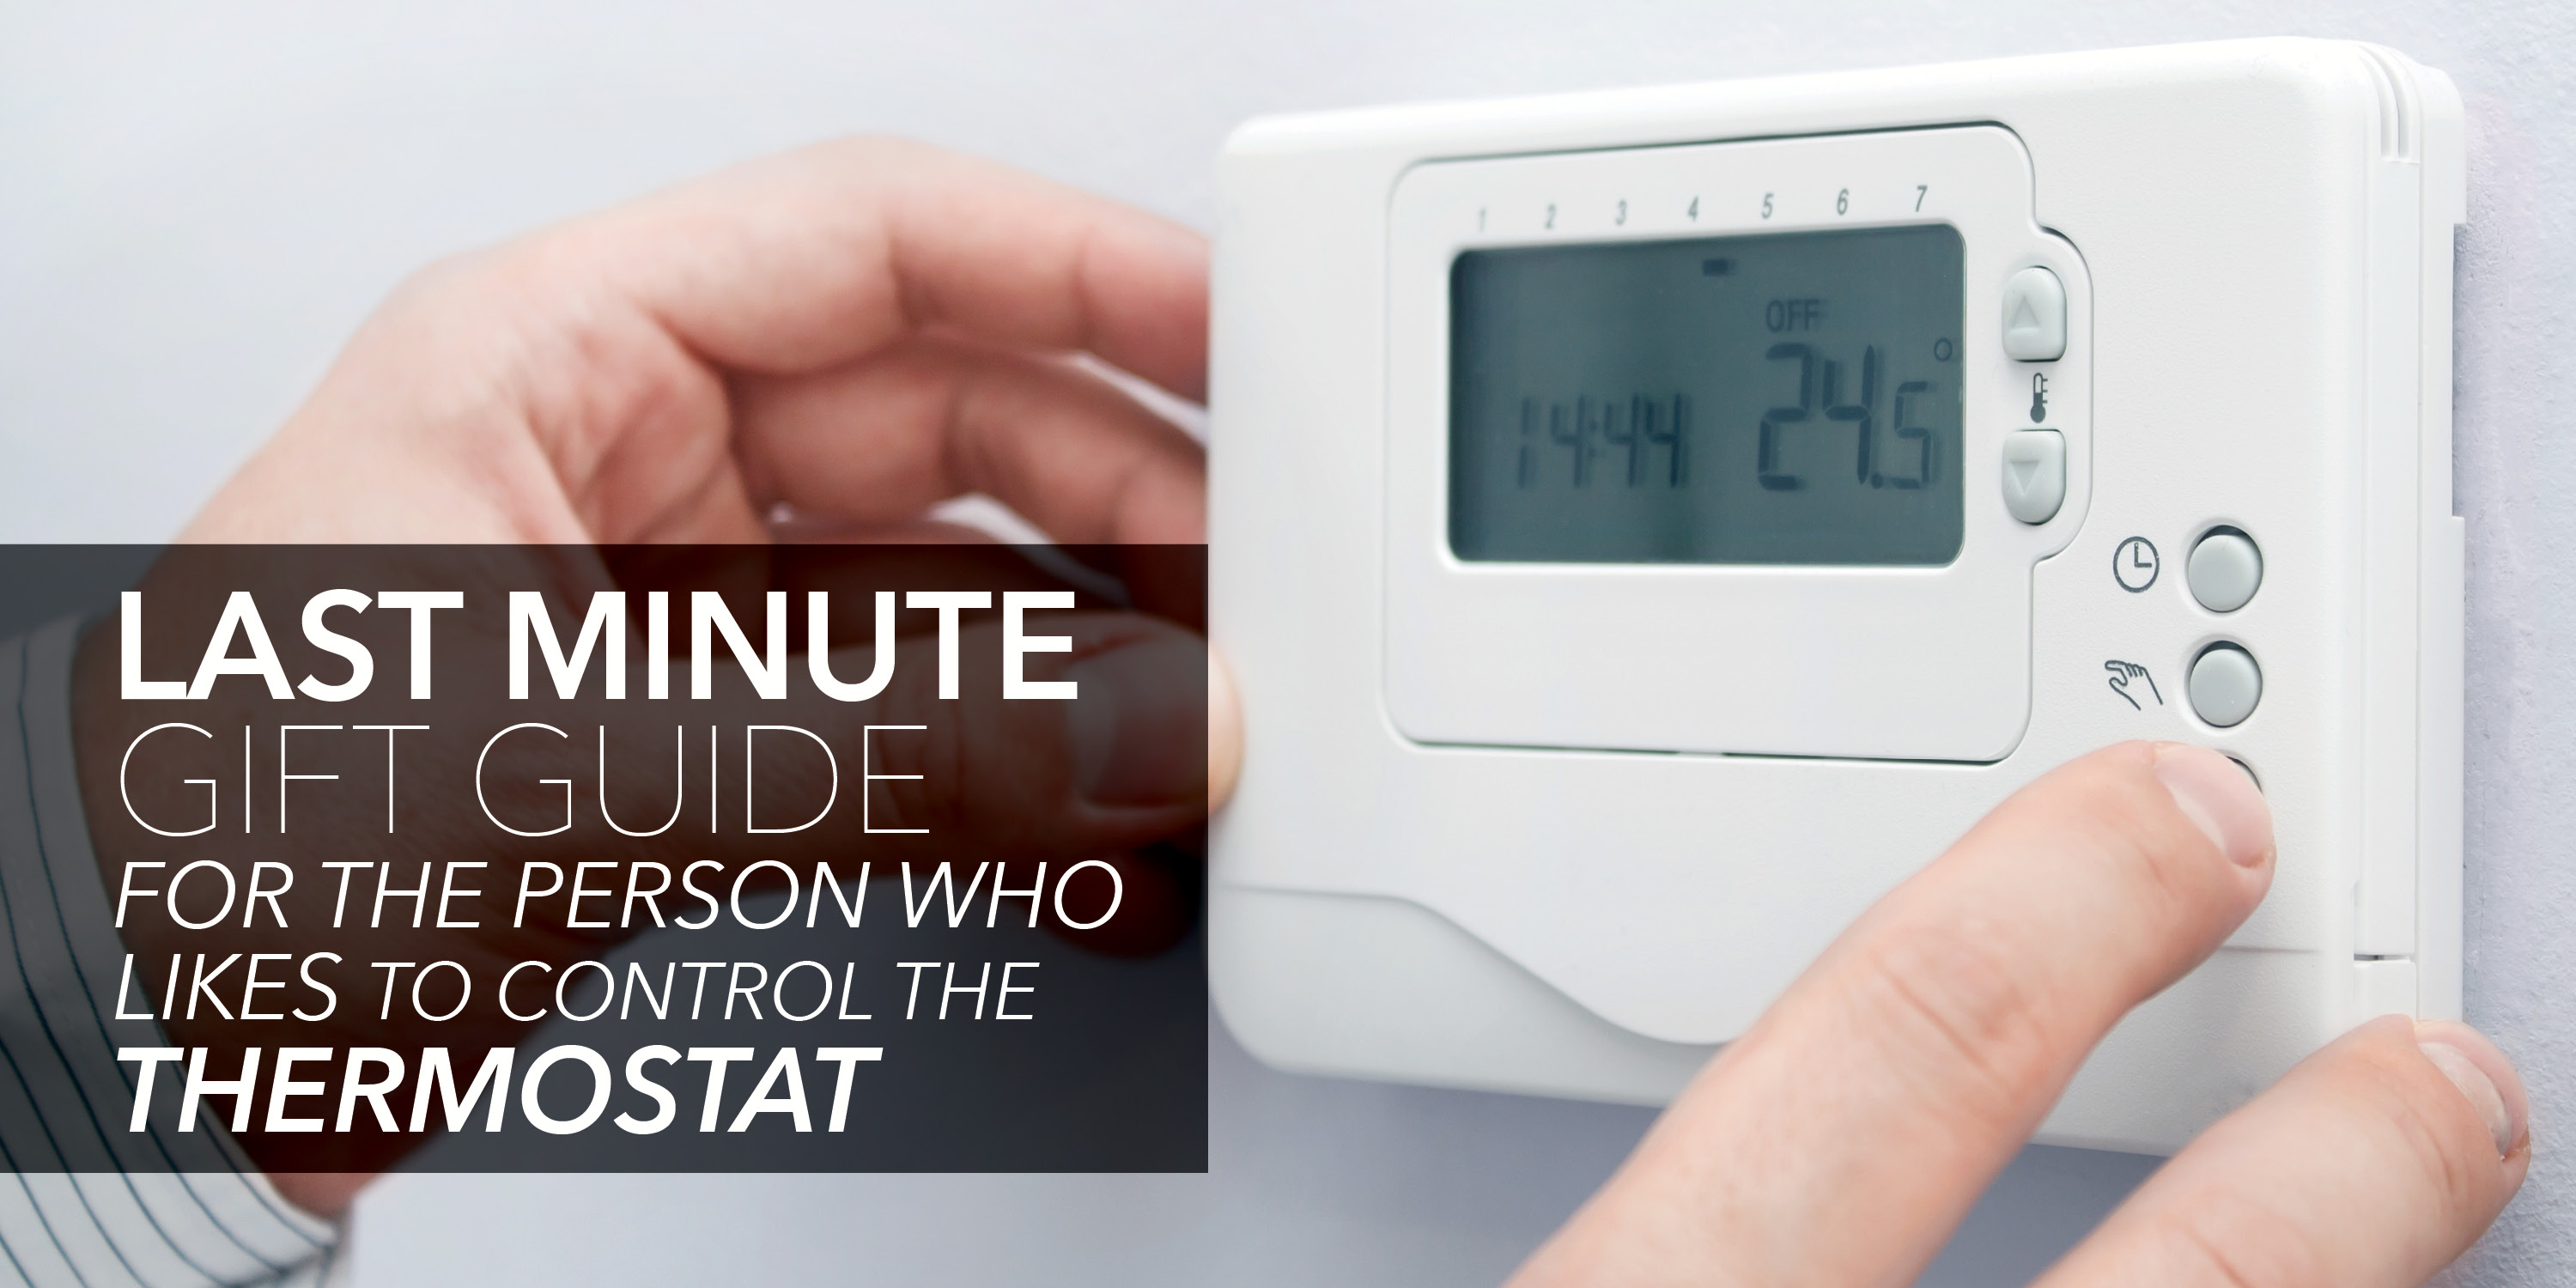 Banner: "Last minute gift guide for the person who likes to control the thermostat" superimposed over a photo of hands changing the temperature on a digital thermostat